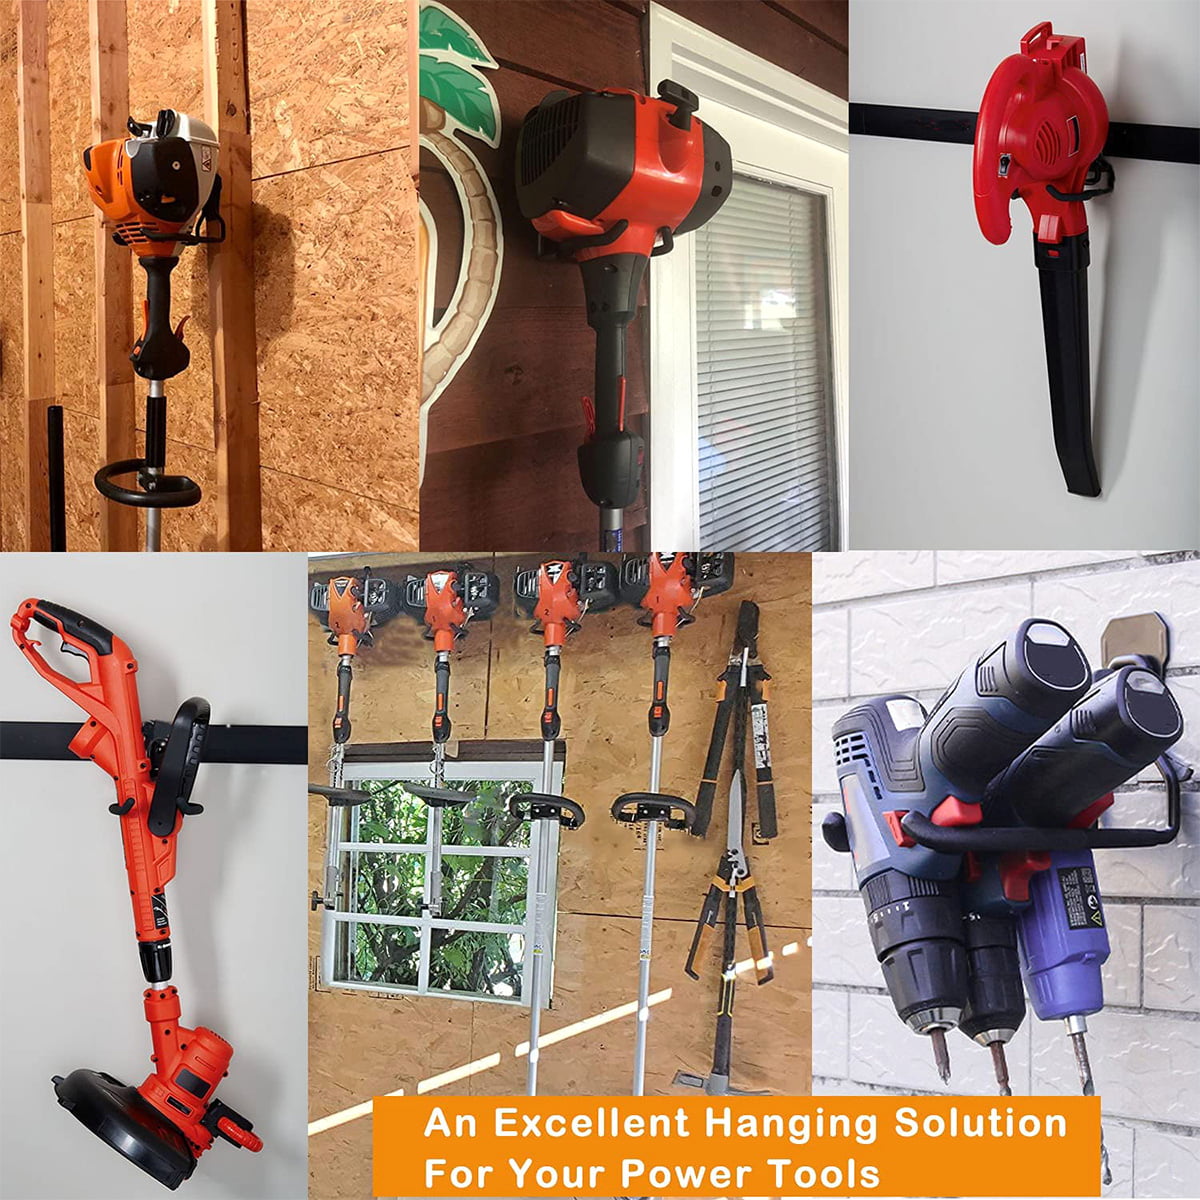 for Garage Tool Organizers and Storage Medium U Weed Eater Wall Holder Weedeater Wall Hanger 2Pcs String Trimmer Hanger Wall Mount Wall Mount Garden Power Tool Hanger 